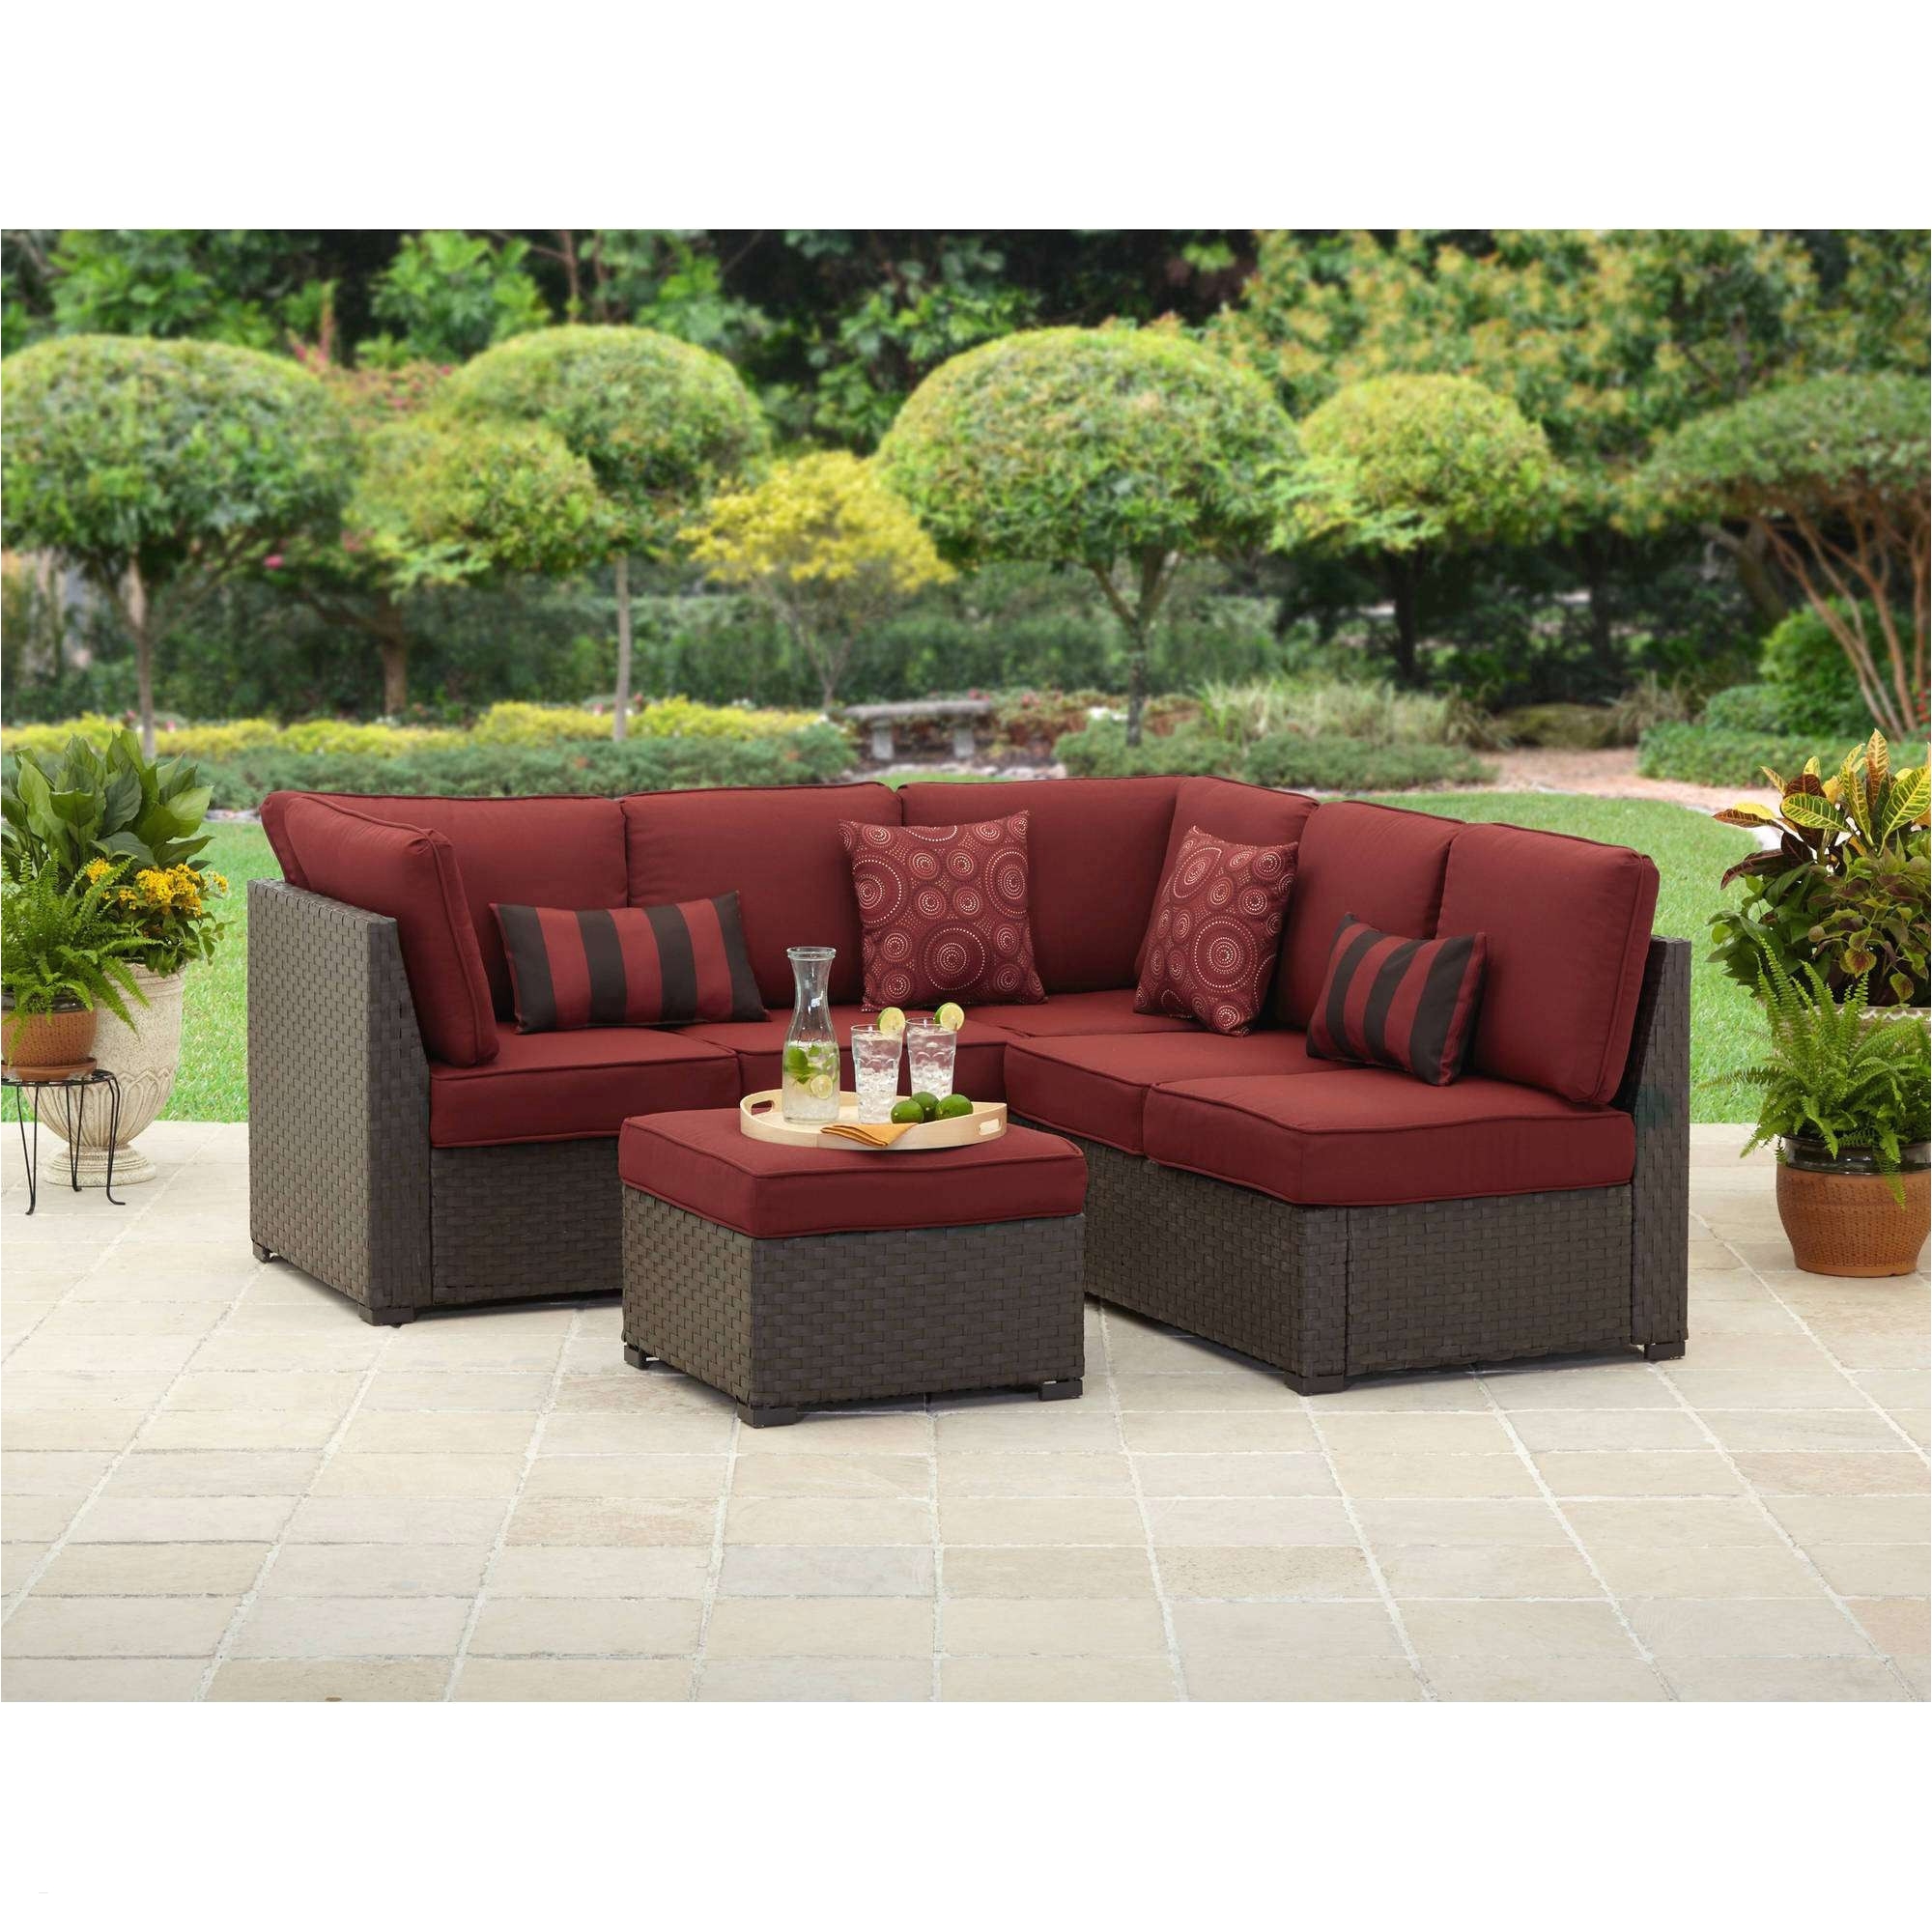 Electric Fireplaces at Walmart Brilliant Walmart Outdoor Furniture Bomelconsult Com